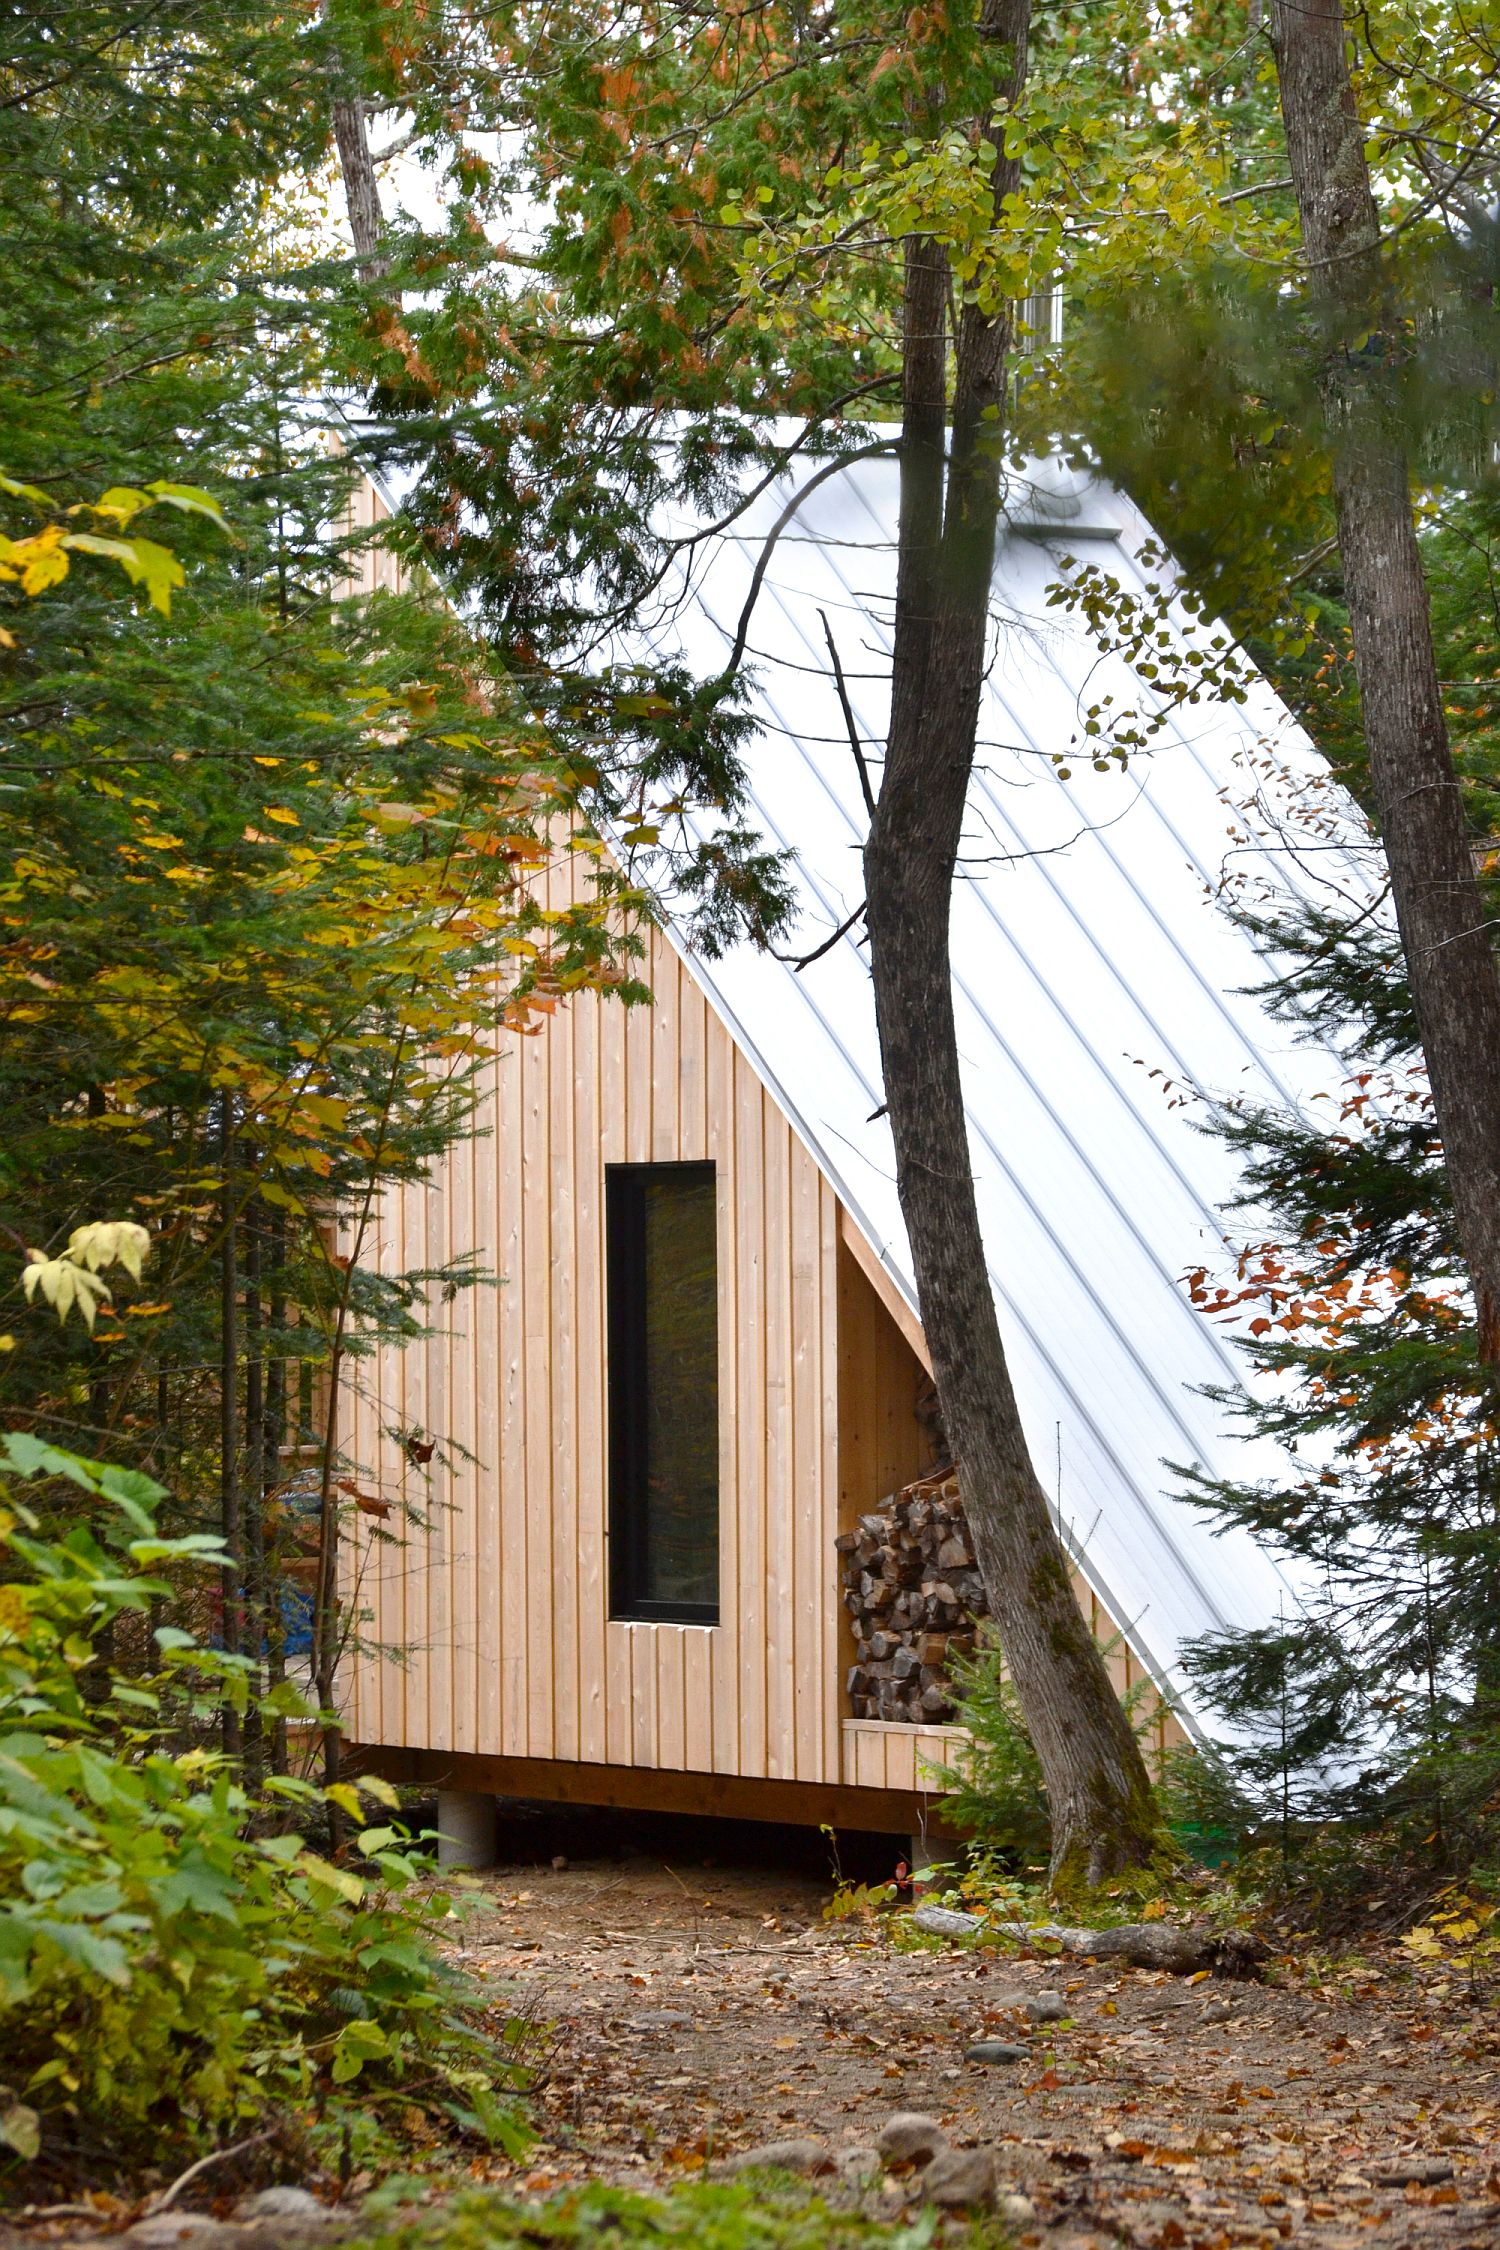 Wood-and-metal-exterior-of-the-micro-shelter-in-woods